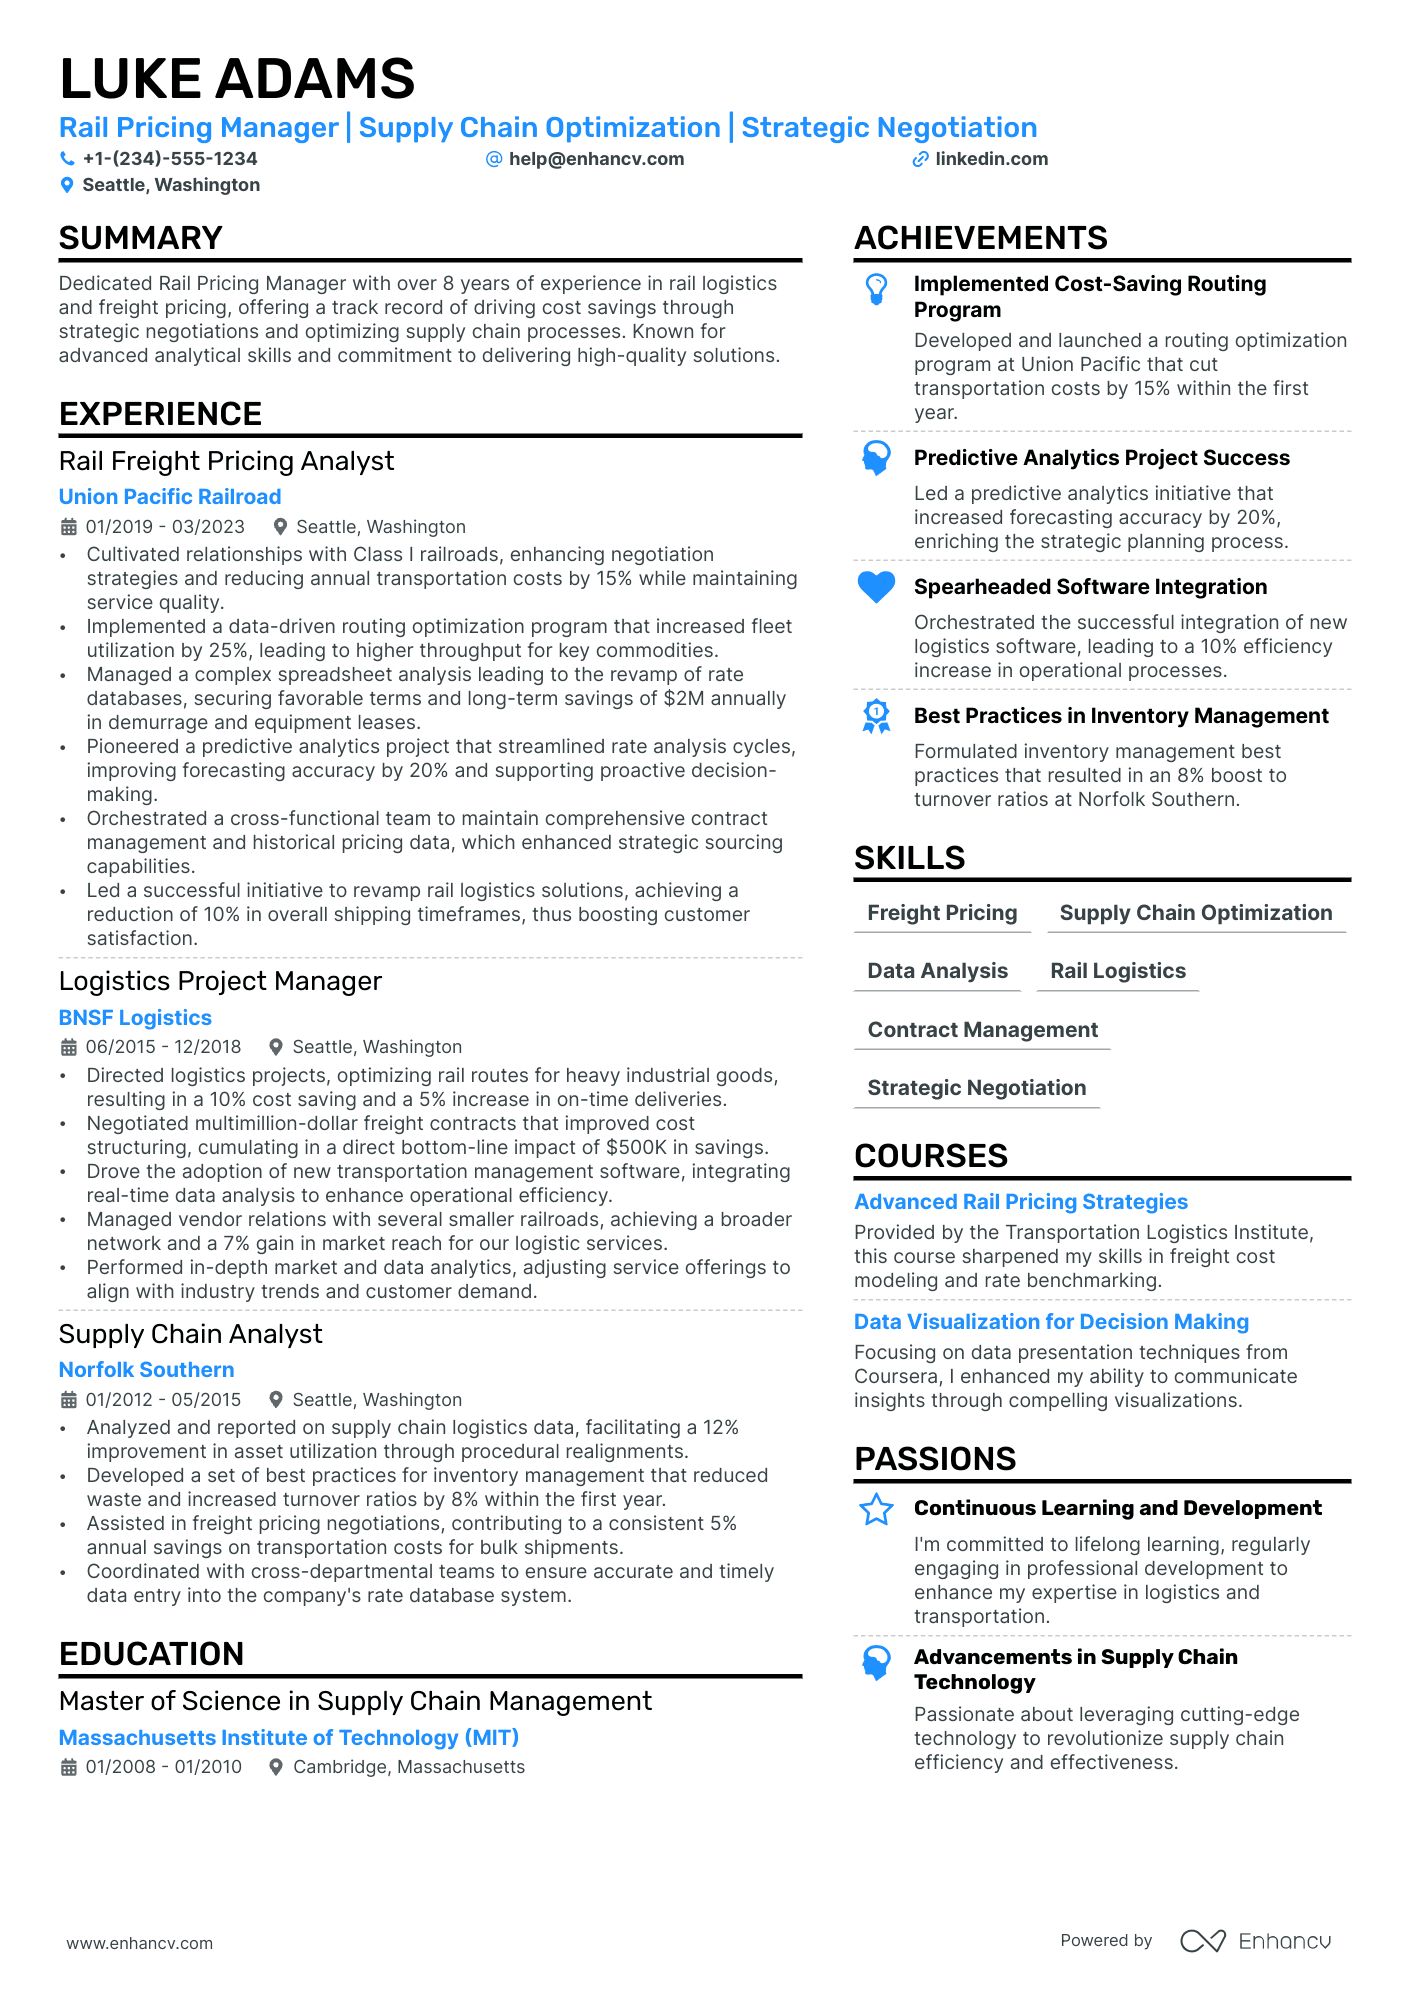 Pricing Manager resume example